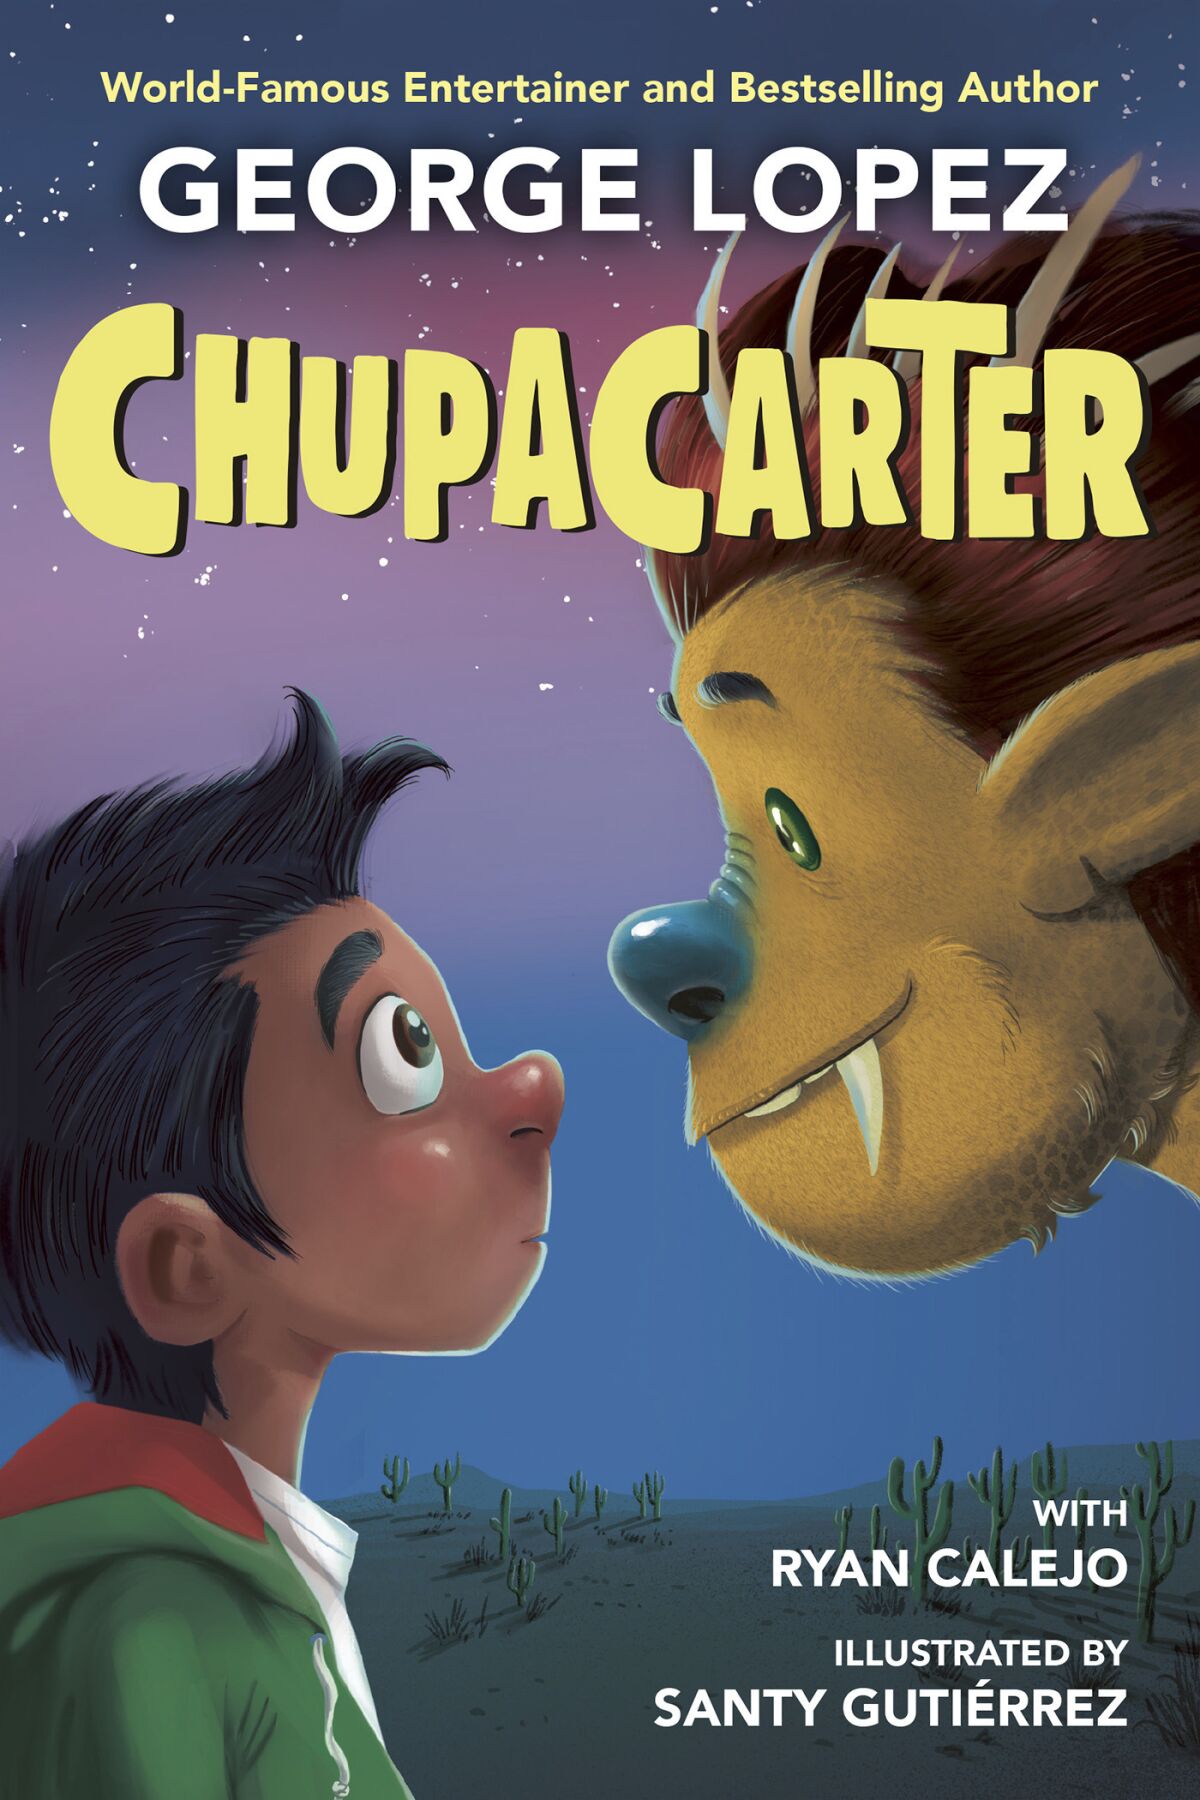 This image released by Viking Books for Young Readers shows "Chupacarter," by George Lopez. (Viking Books for Young Readers via AP)